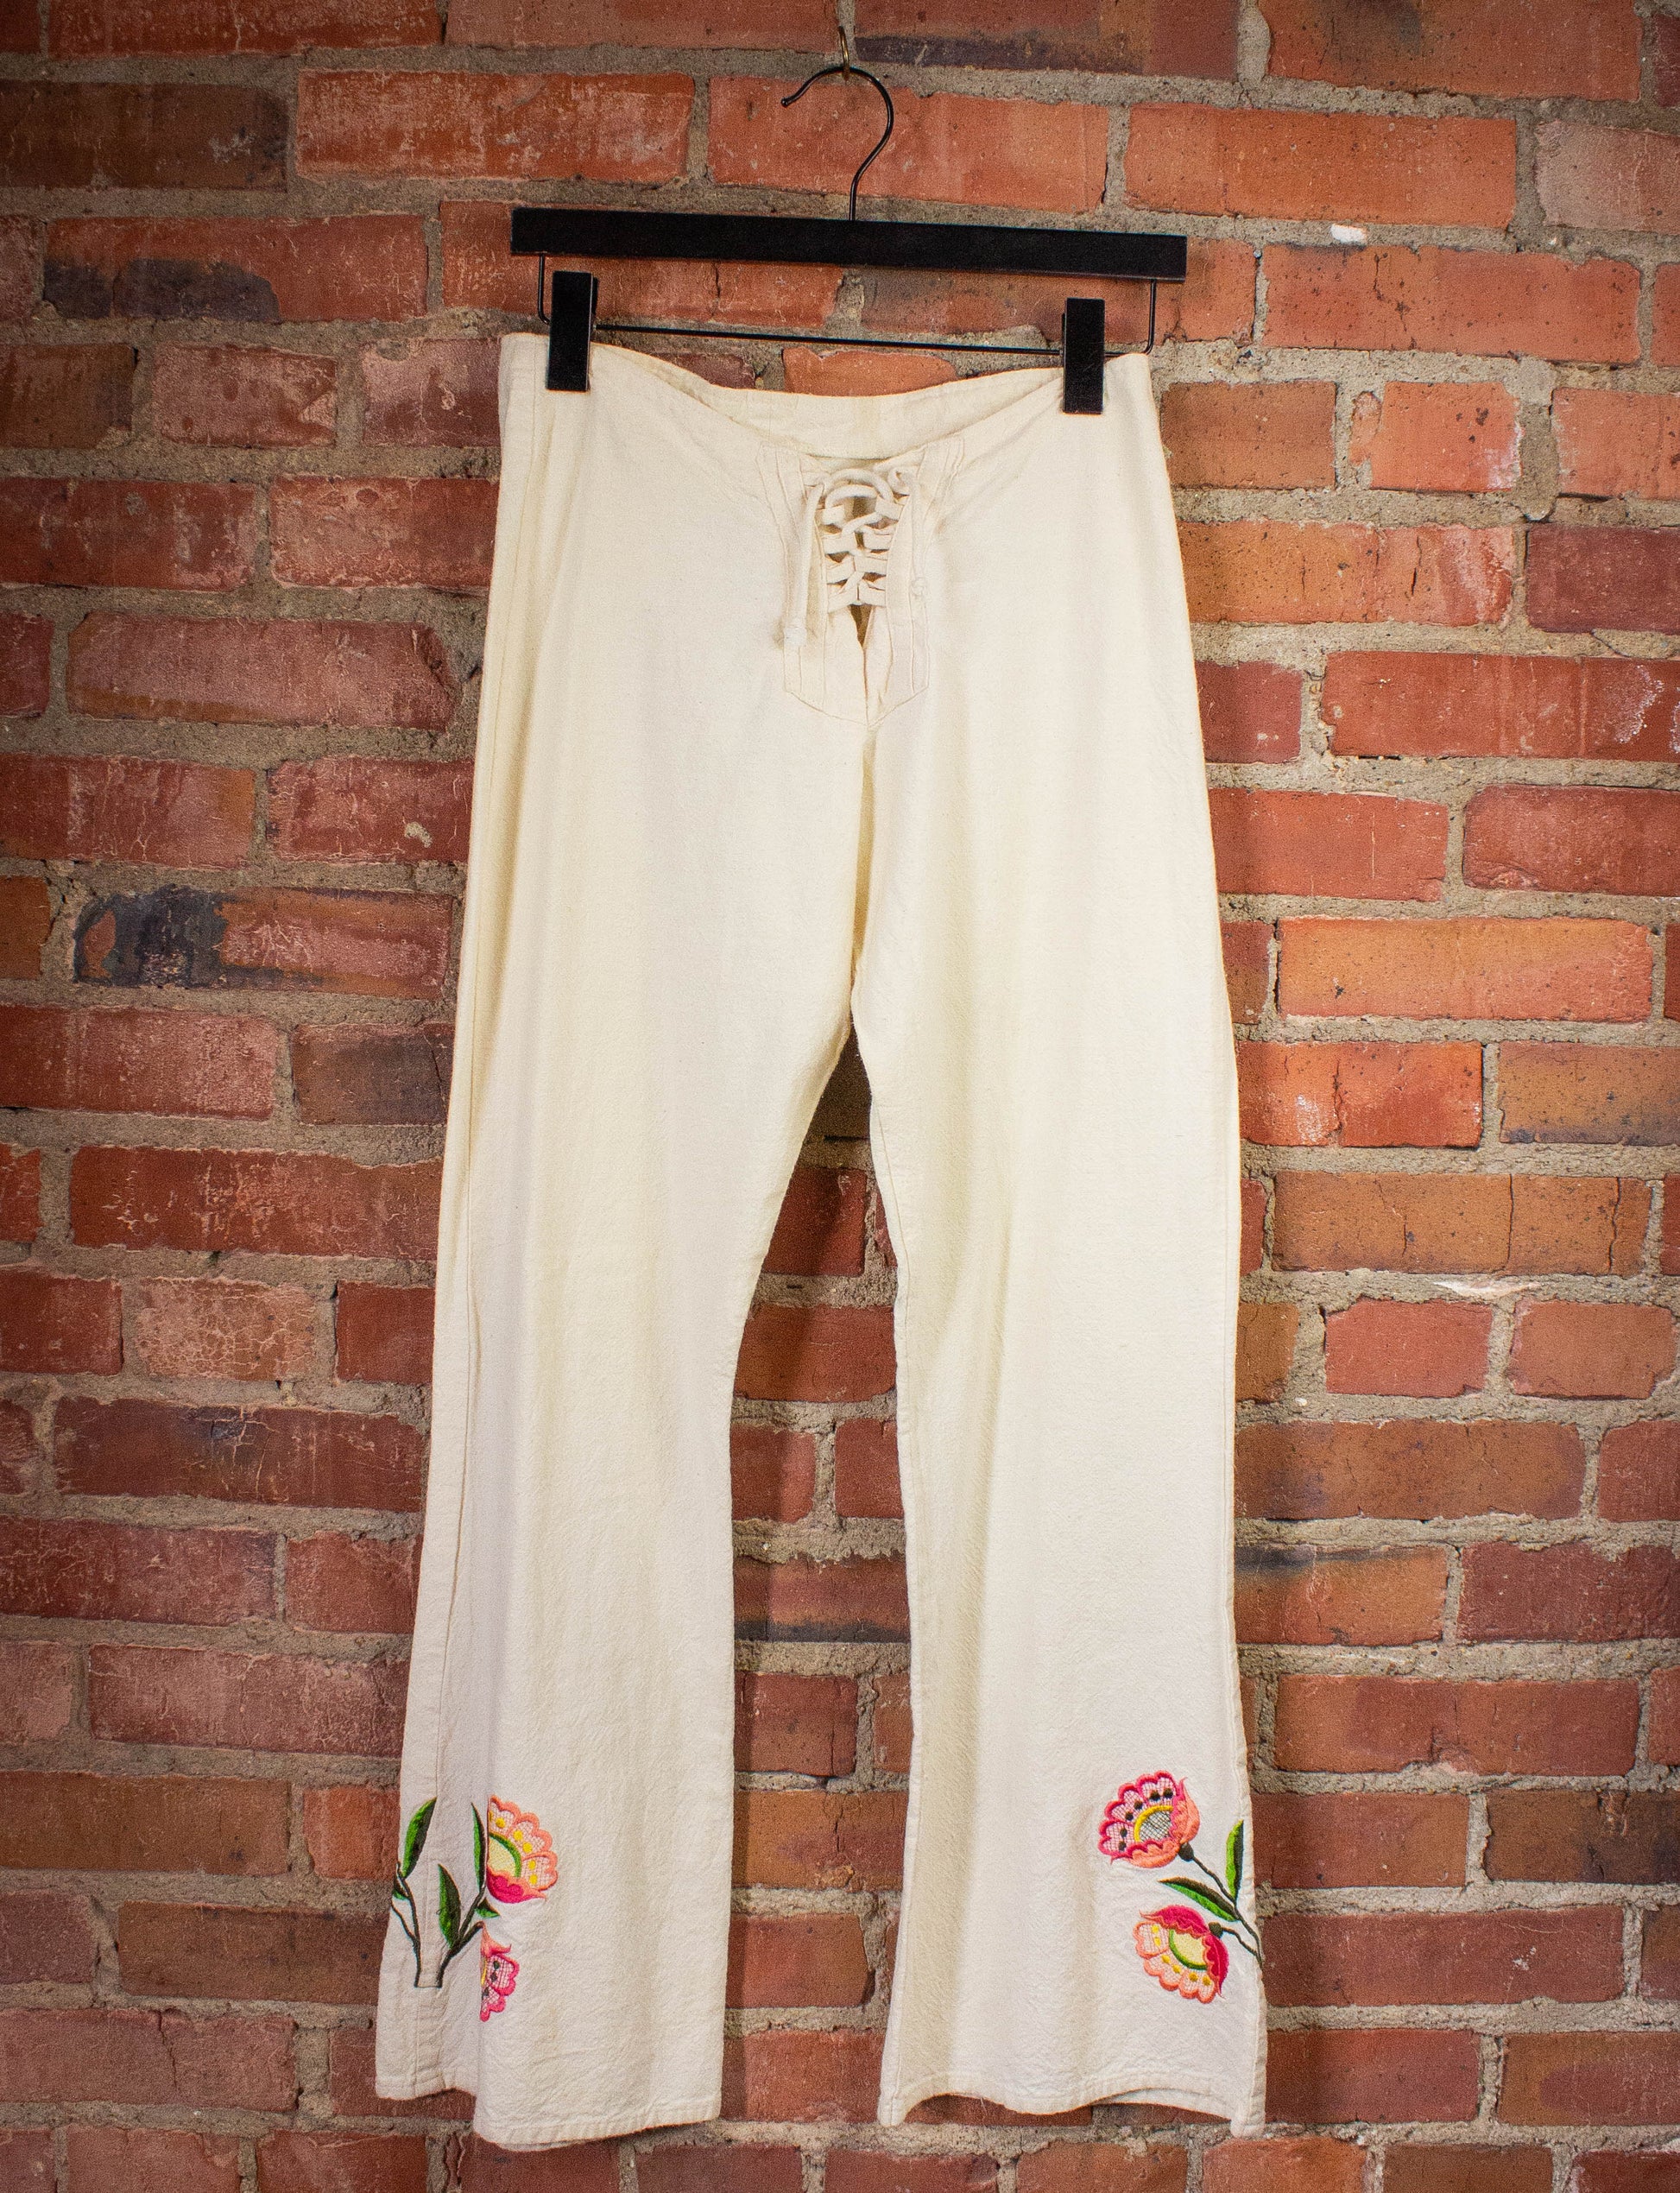 Vintage Flower Embroidered Lace Up Bell Bottoms Pants White 70s 28x29